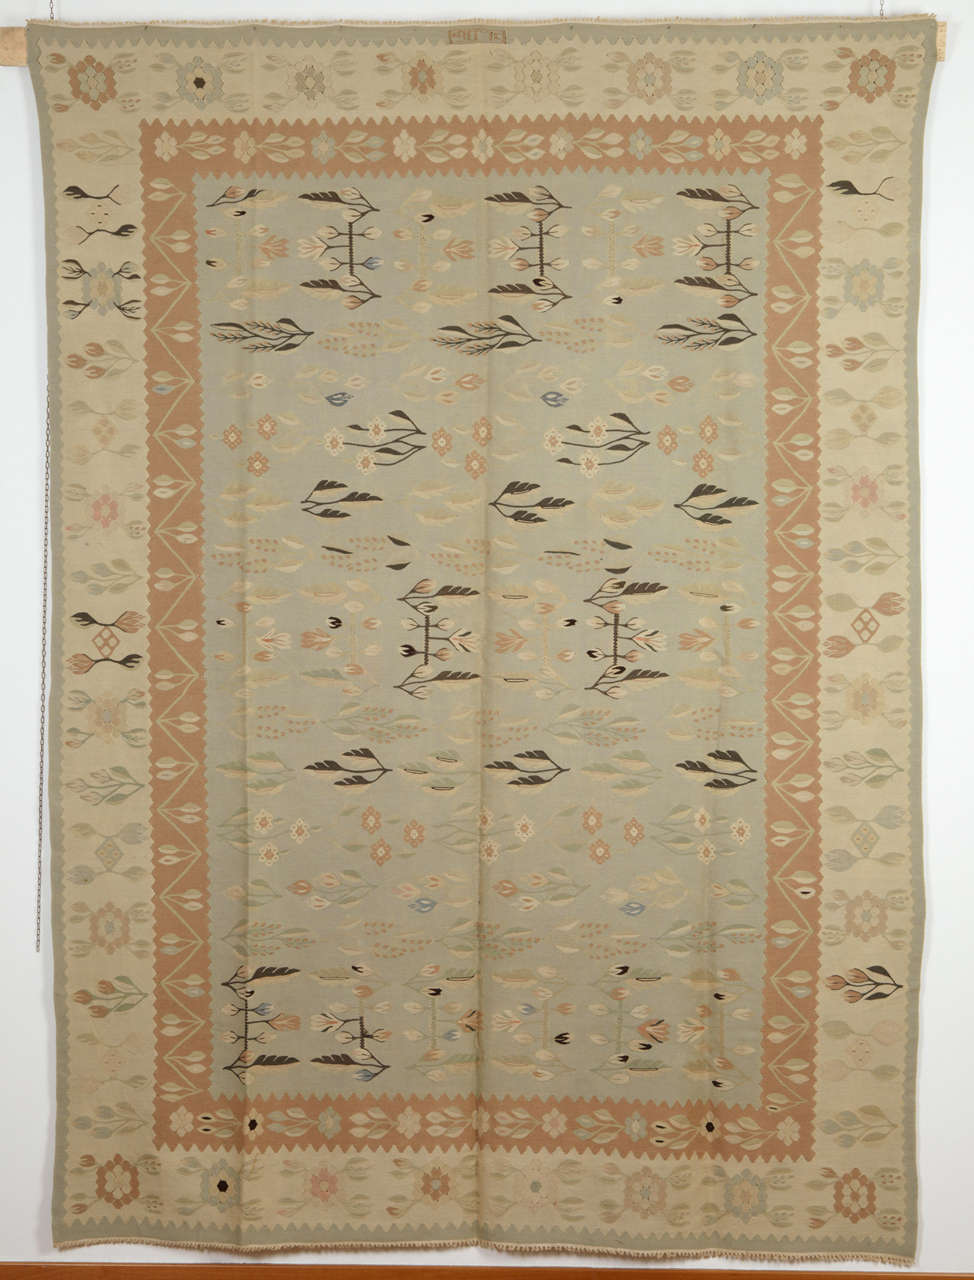 The kilims known as 'Bessarabian' were woven in the Russian regions of Ukraine and Moldovia. Intended to satisfy the demands of the Russian aristocracy at a time when Continental interiors were particularly in vogue, these flatweaves were